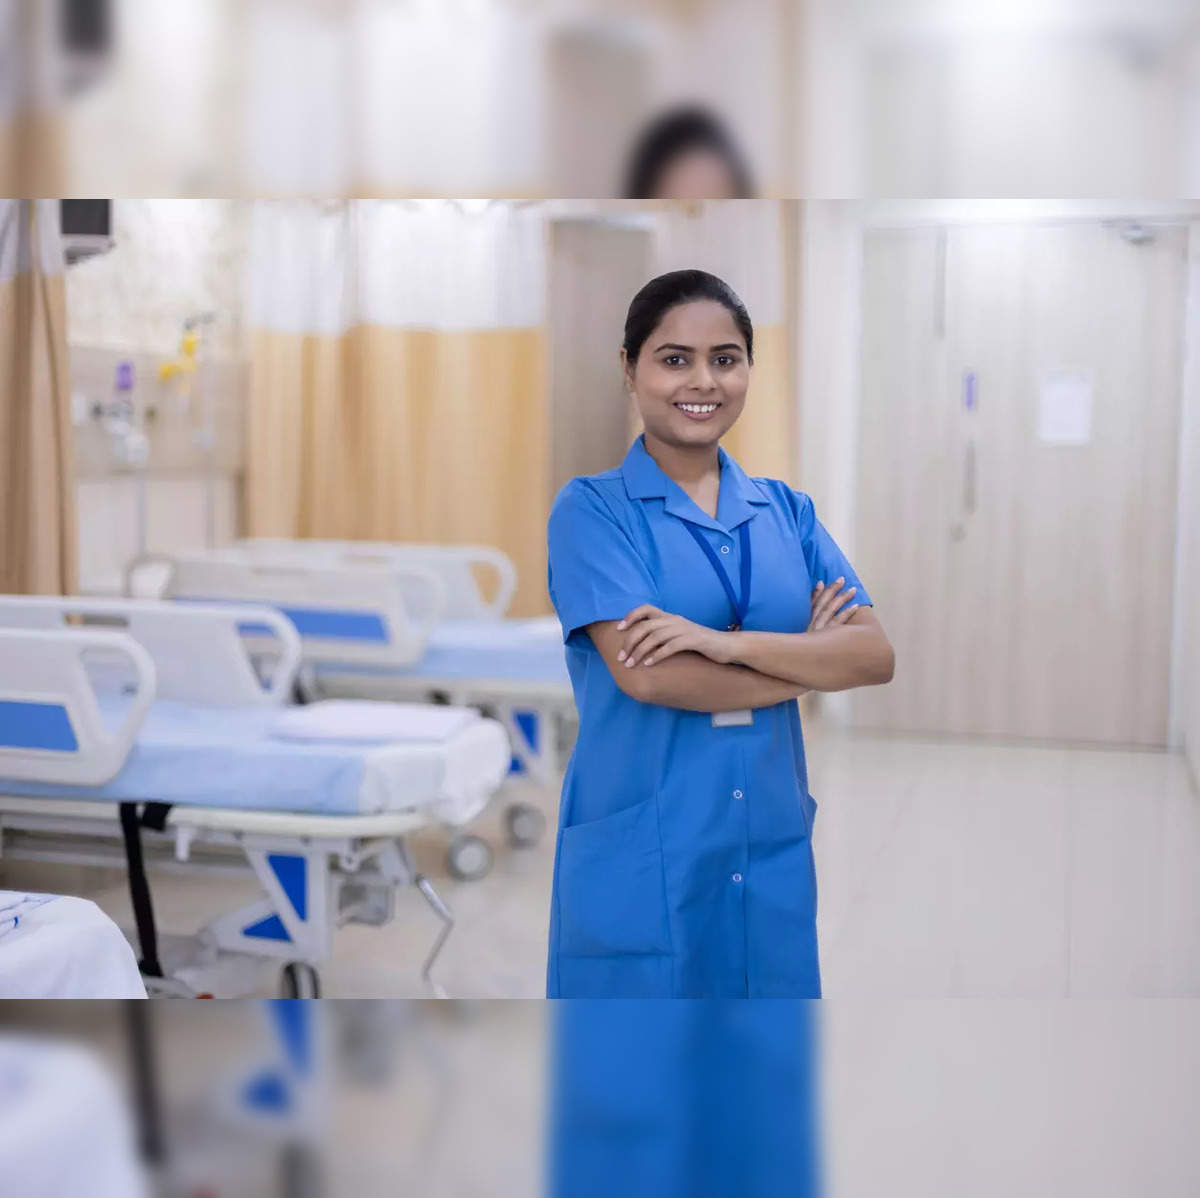 singapore: Singapore witnesses growing interest from Indian nurses as it  grapples to combat manpower crisis - The Economic Times